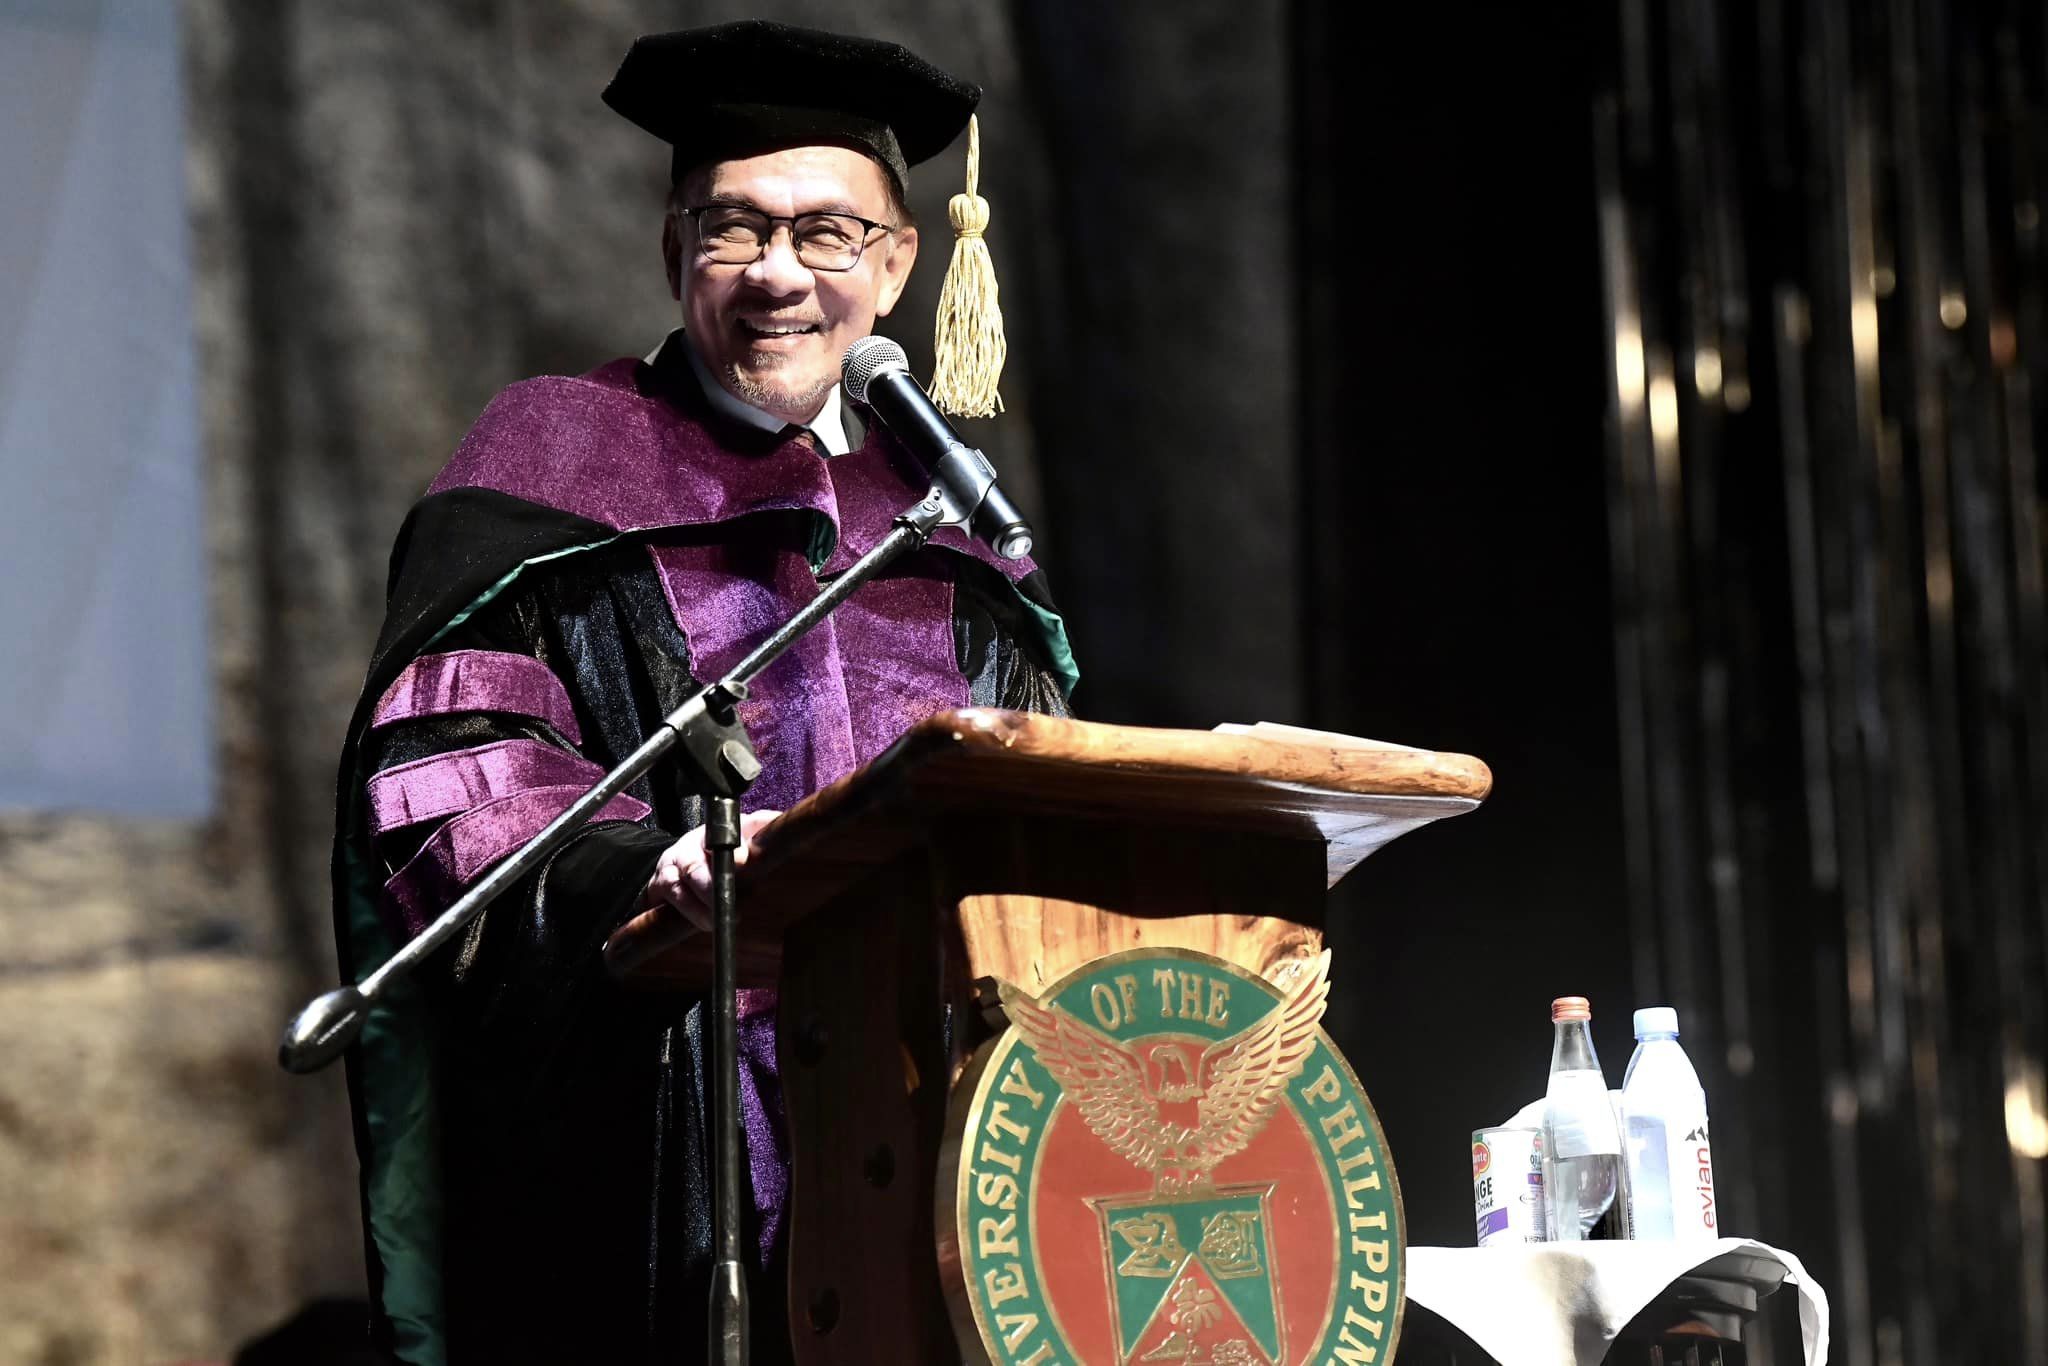 Pm anwar awarded doctorate degree 04